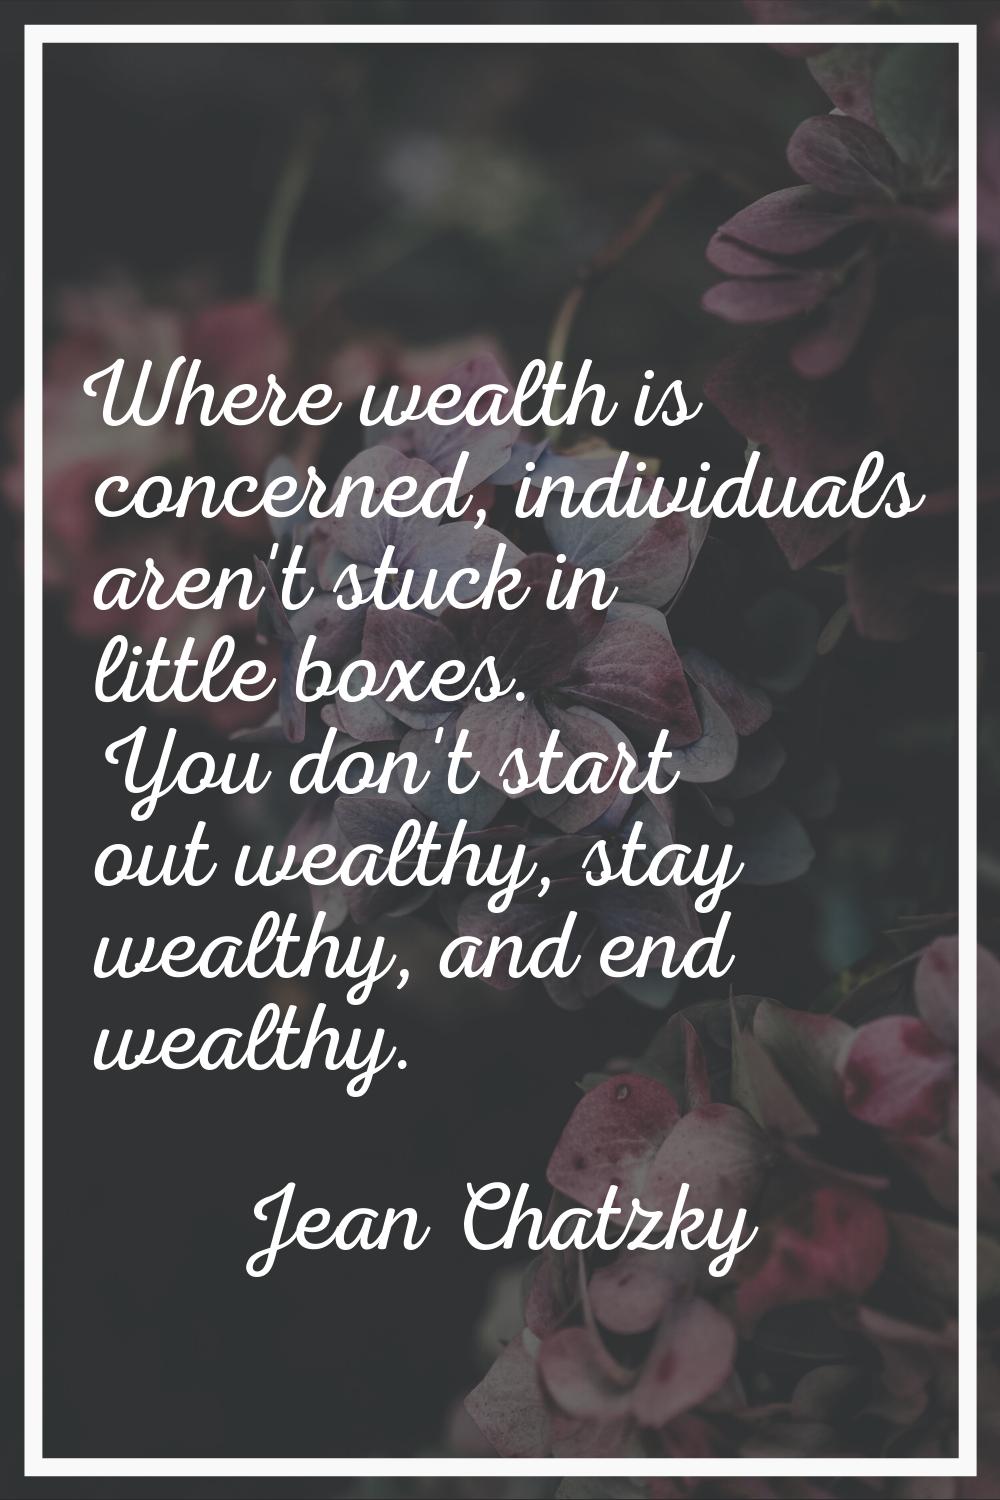 Where wealth is concerned, individuals aren't stuck in little boxes. You don't start out wealthy, s